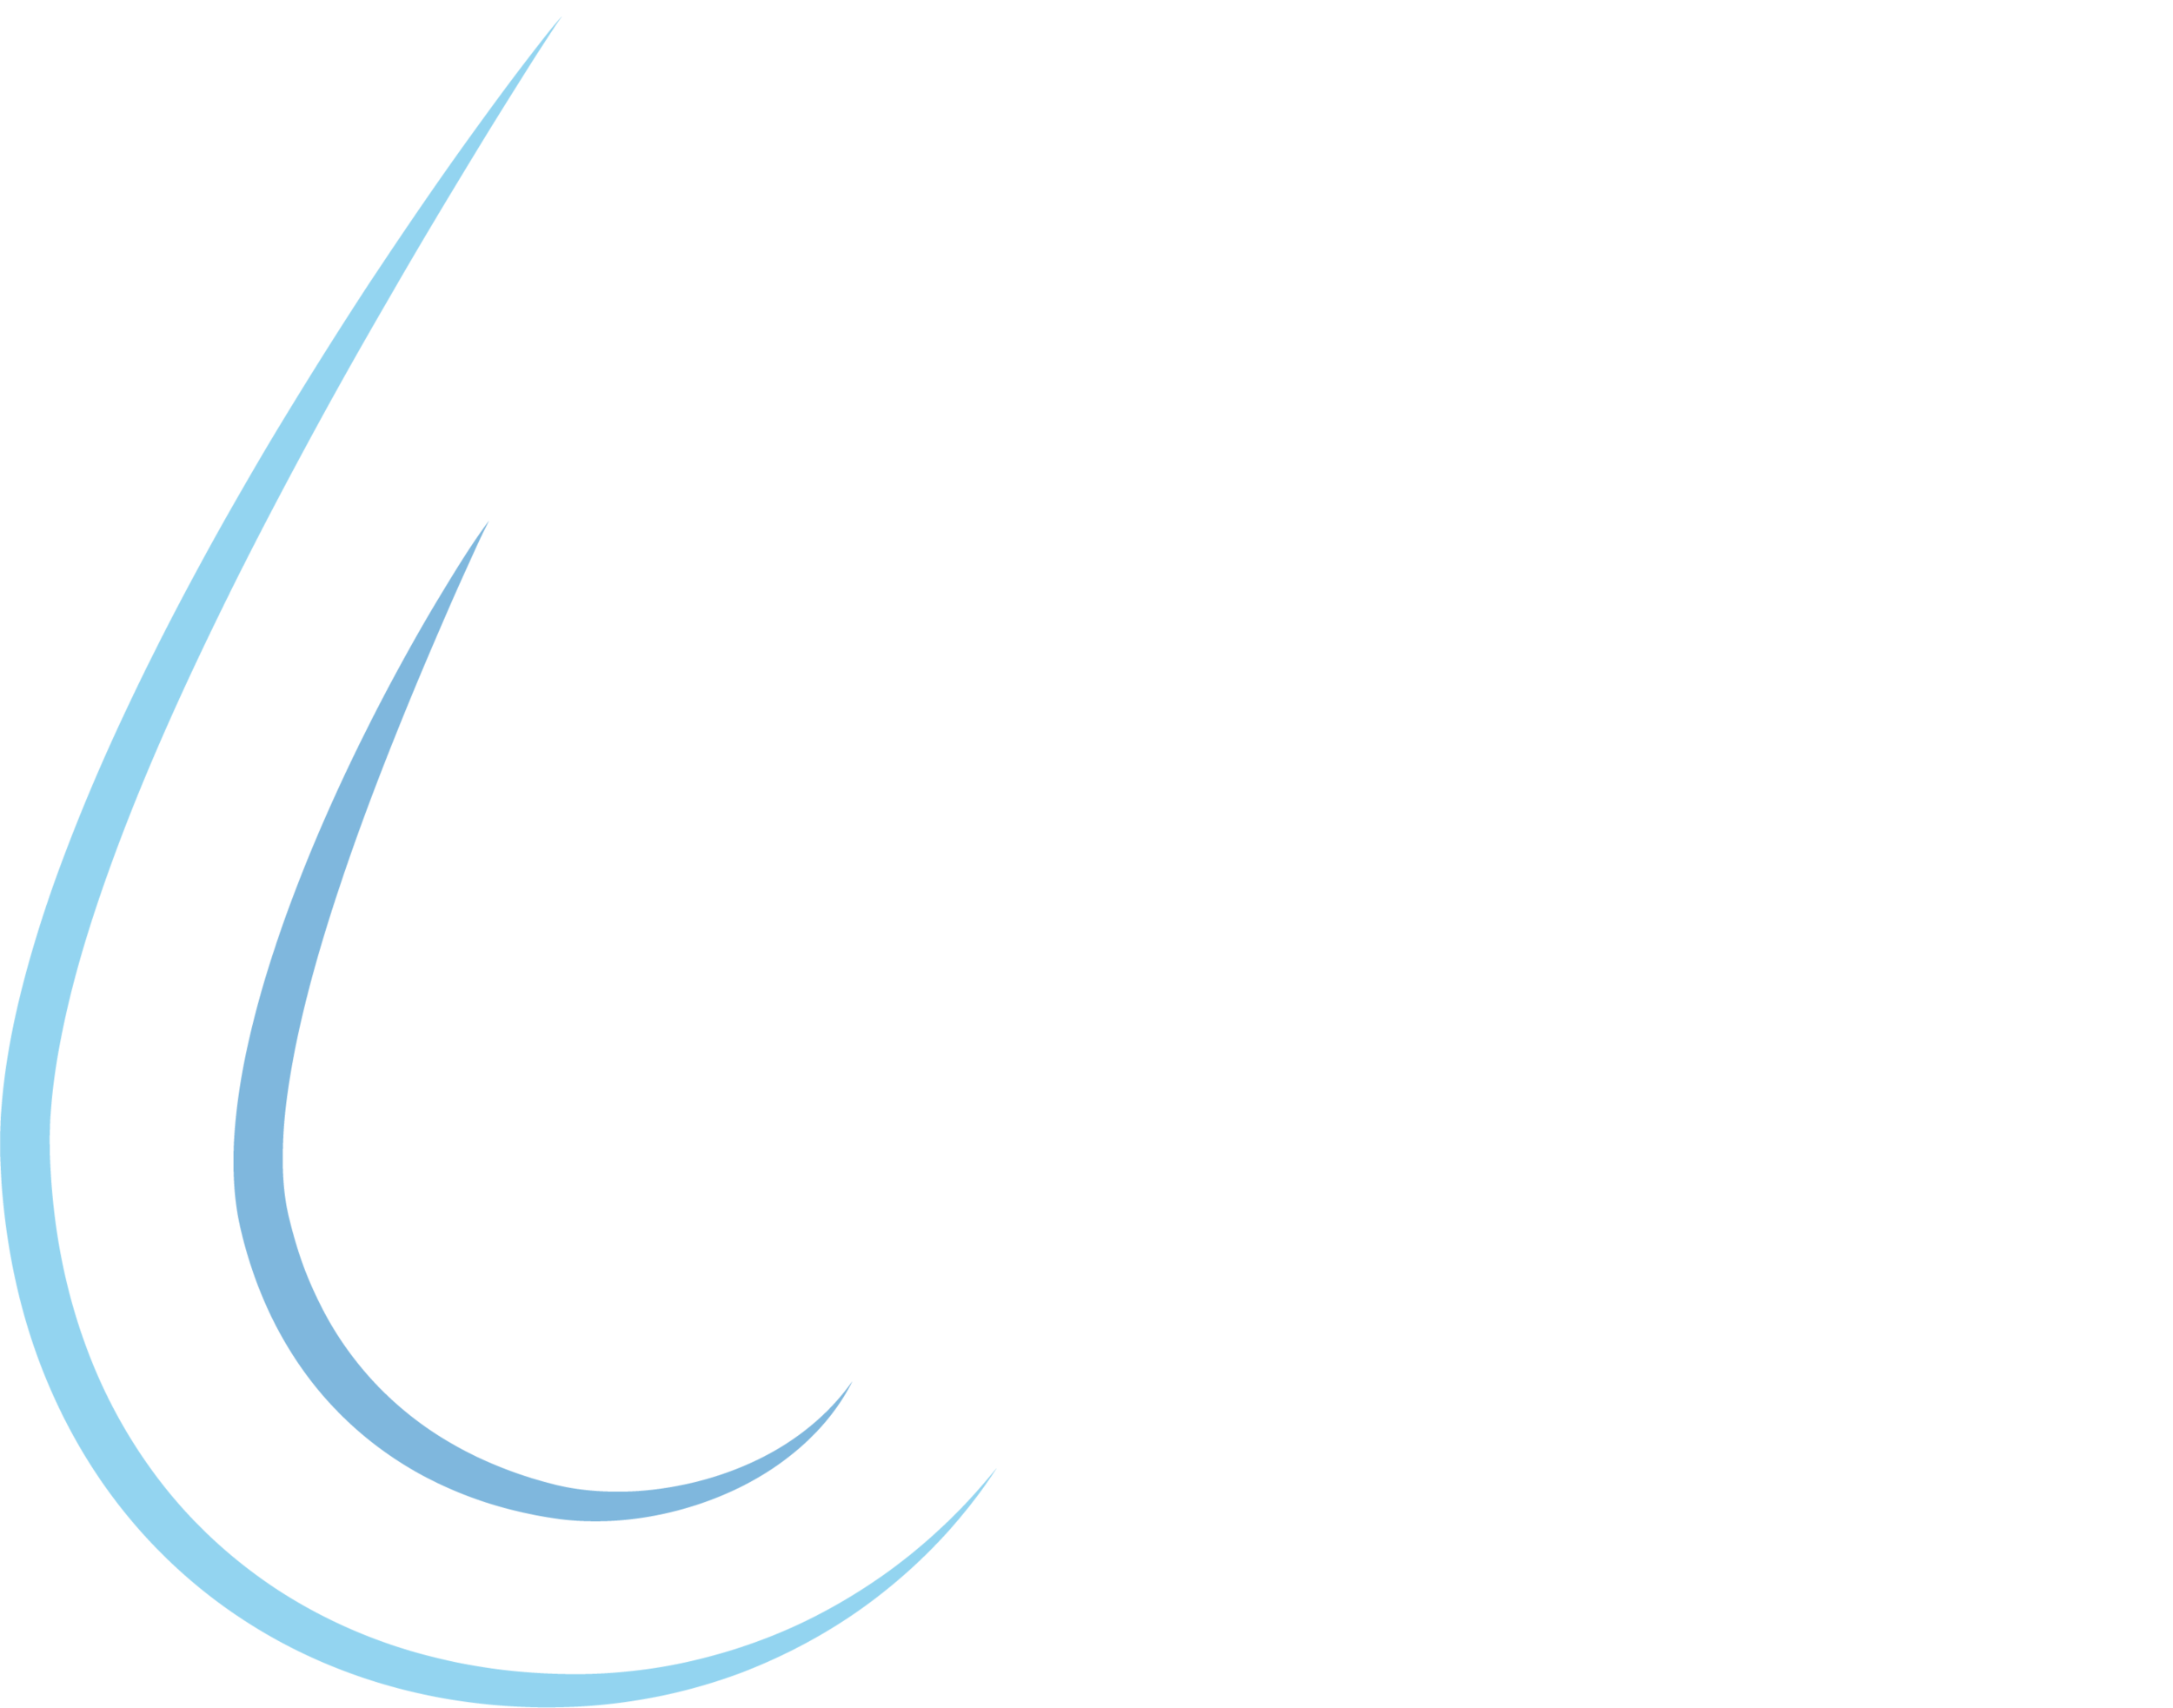 WATER: NFS — Oregon Contemporary